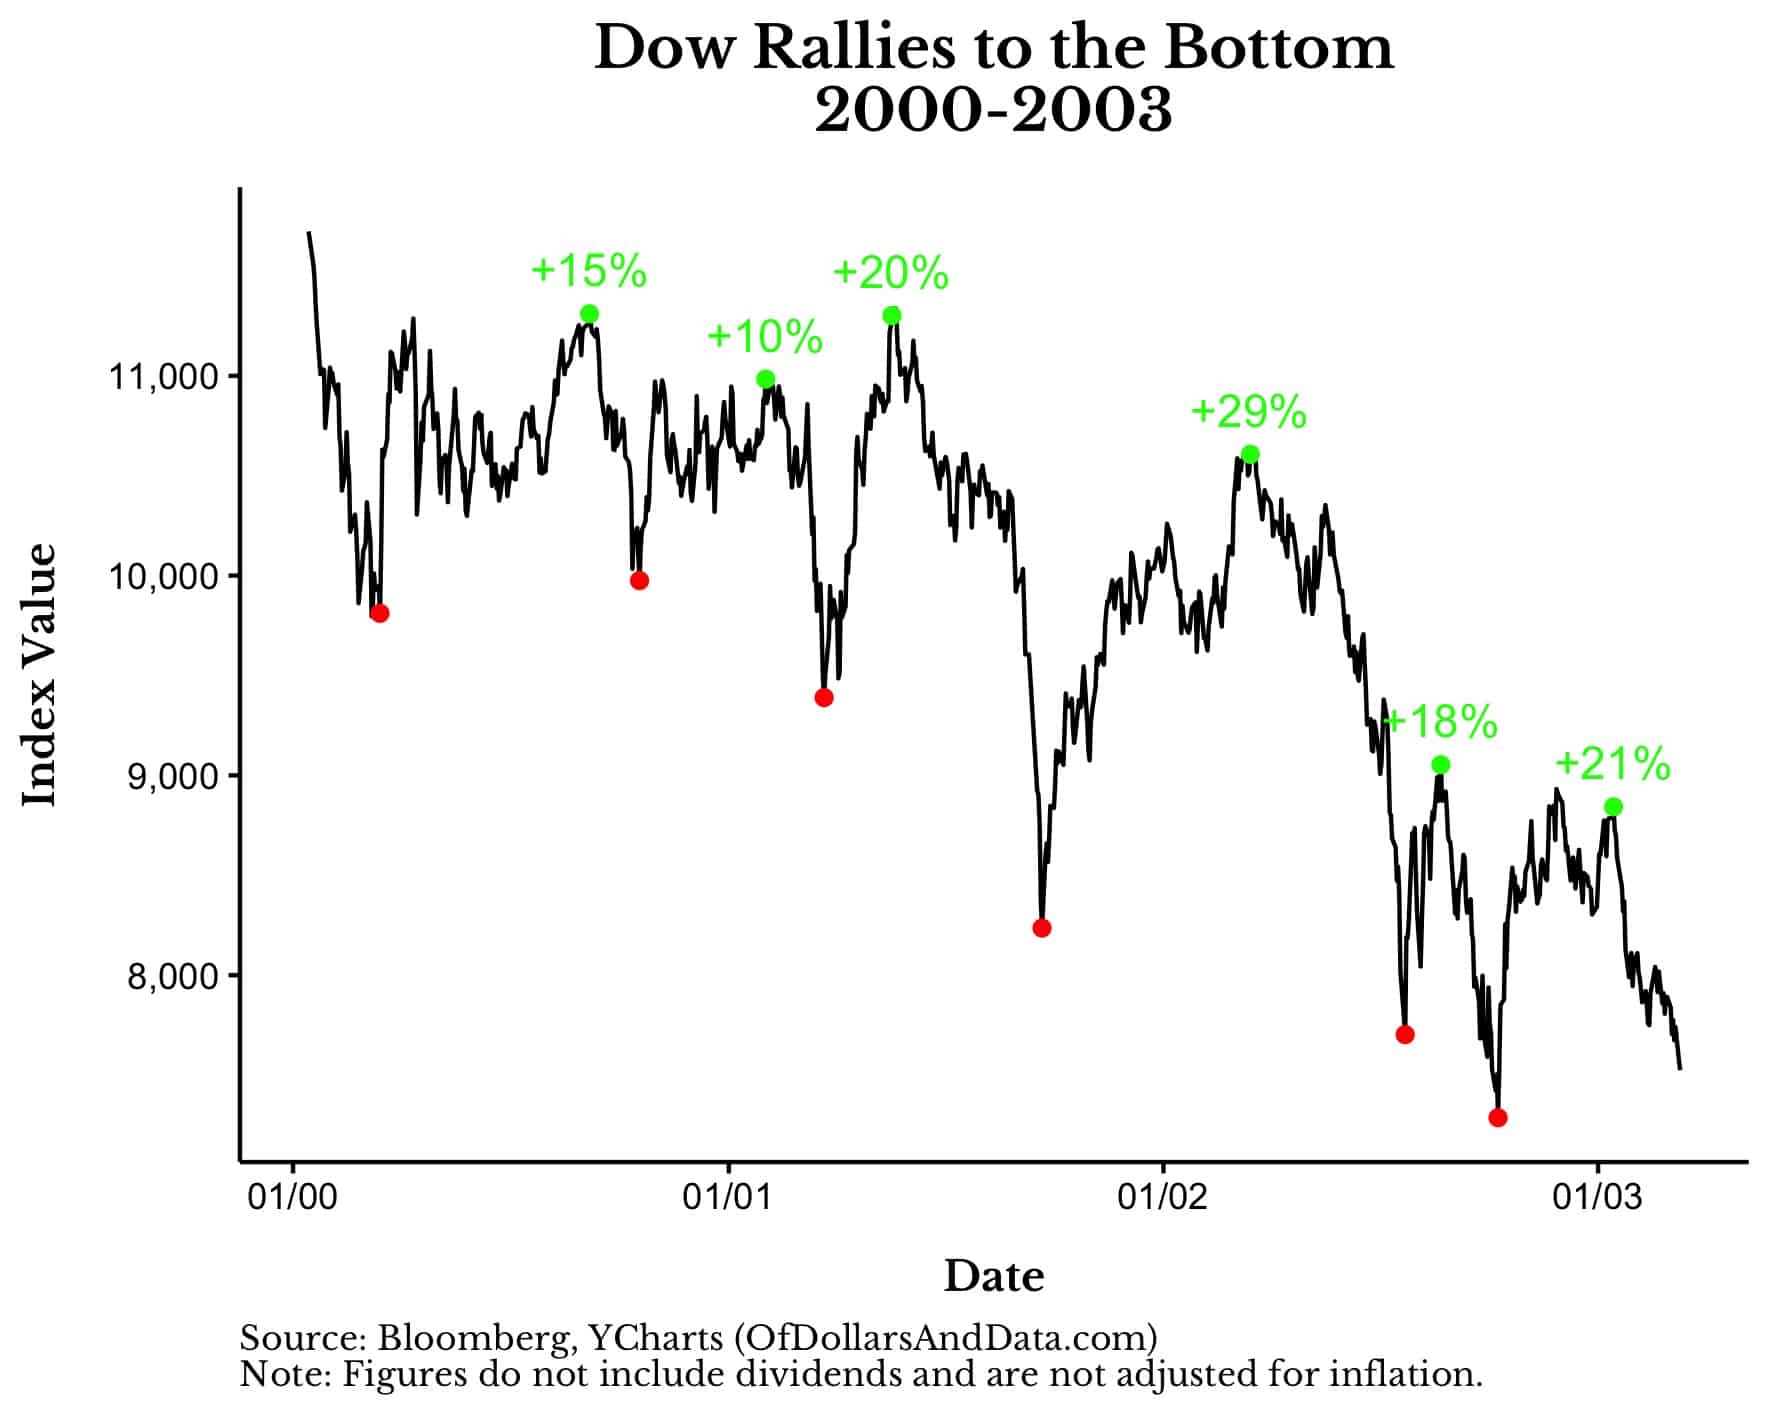 Dow Jones Industrial Average rallies to the bottom from 2000-2003.